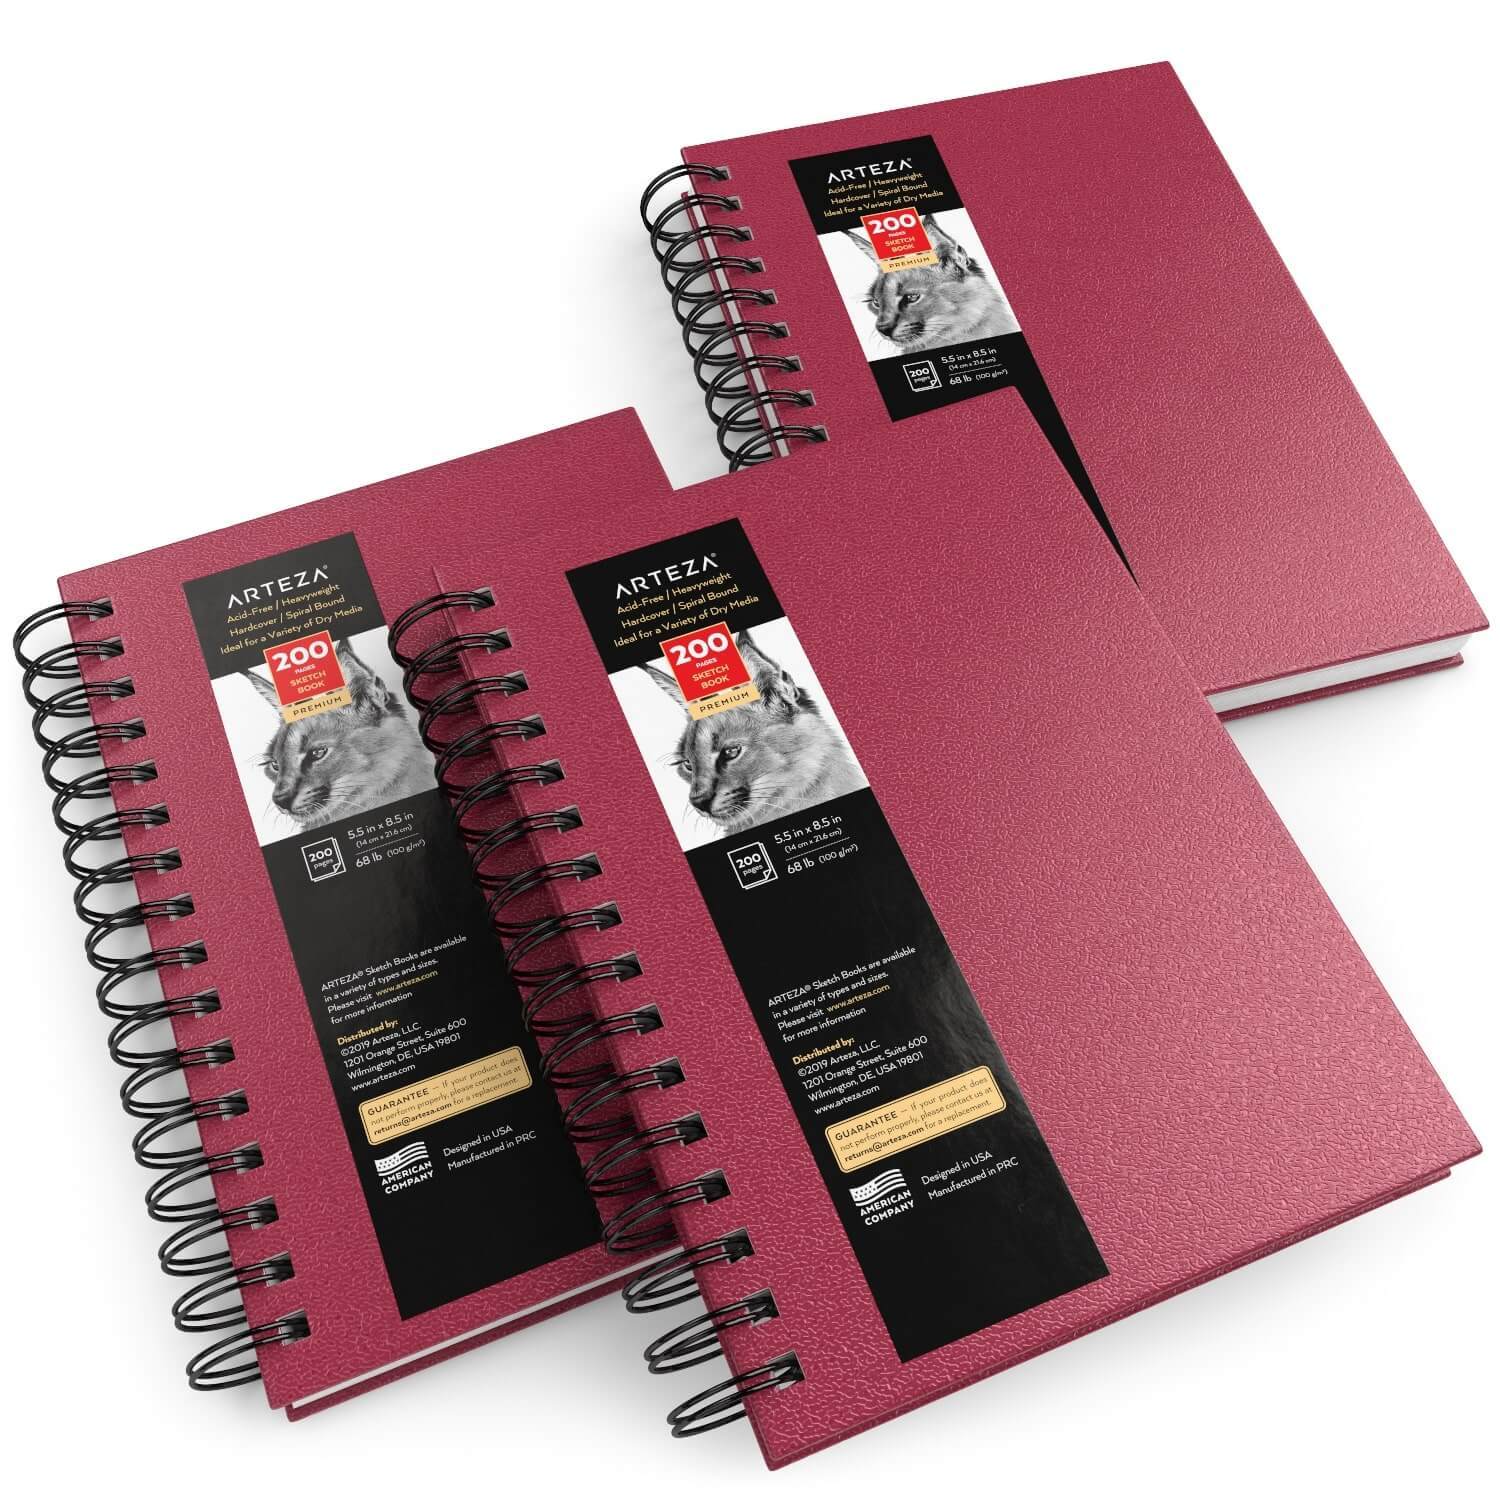 5.5 x 8.5 Linen-Bound Watercolor Sketchbook, 76 Sheets, 110 lb-  Cold-Pressed - 2 Pack, 5.5” x 8.5” - 2 Pack - Harris Teeter